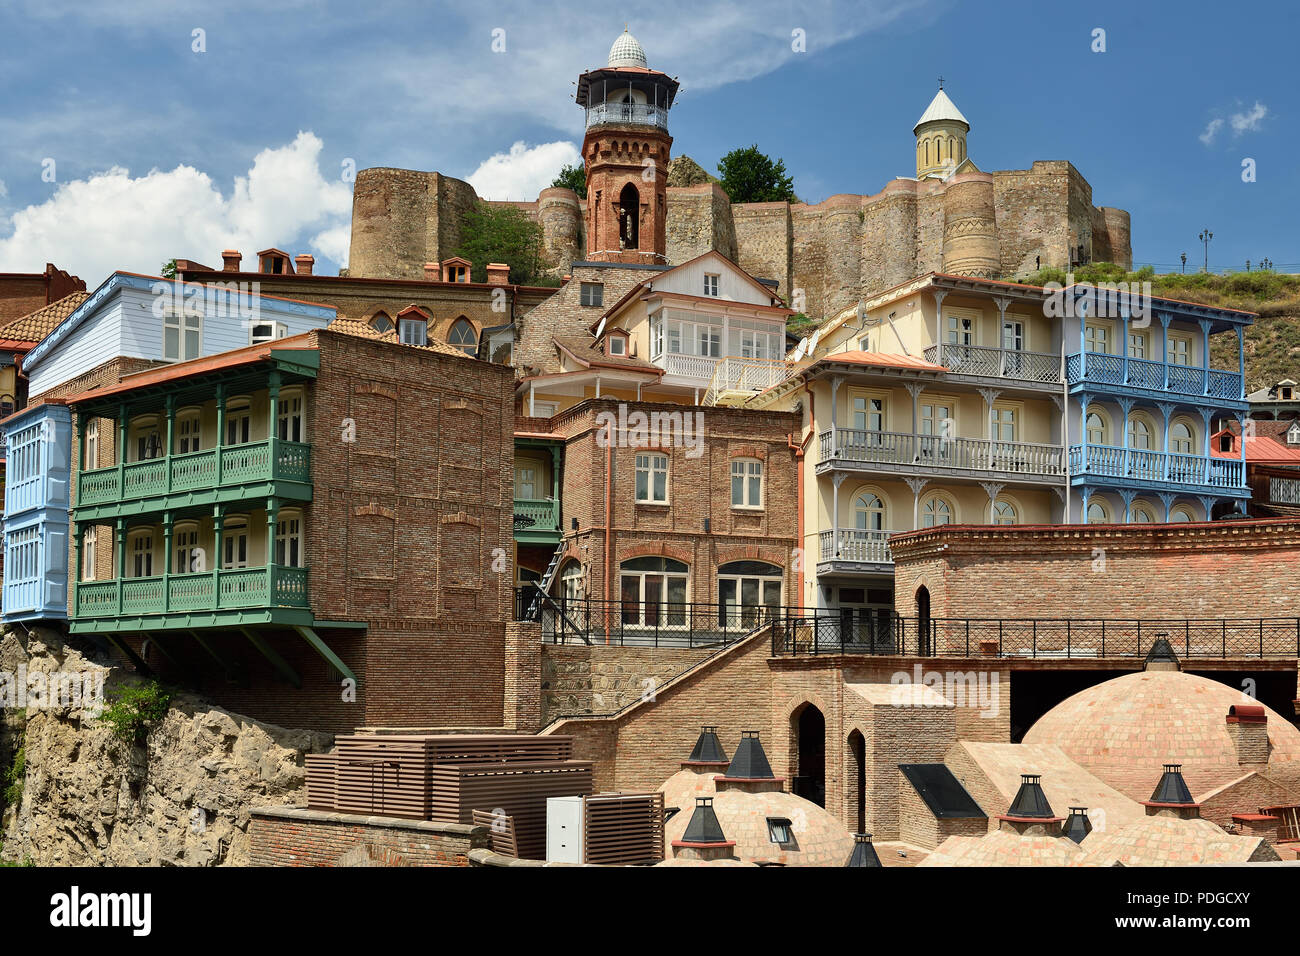 Georgia, Traditional houses with wooden carved balconies in the Old Town of Tbilisi, Stock Photo